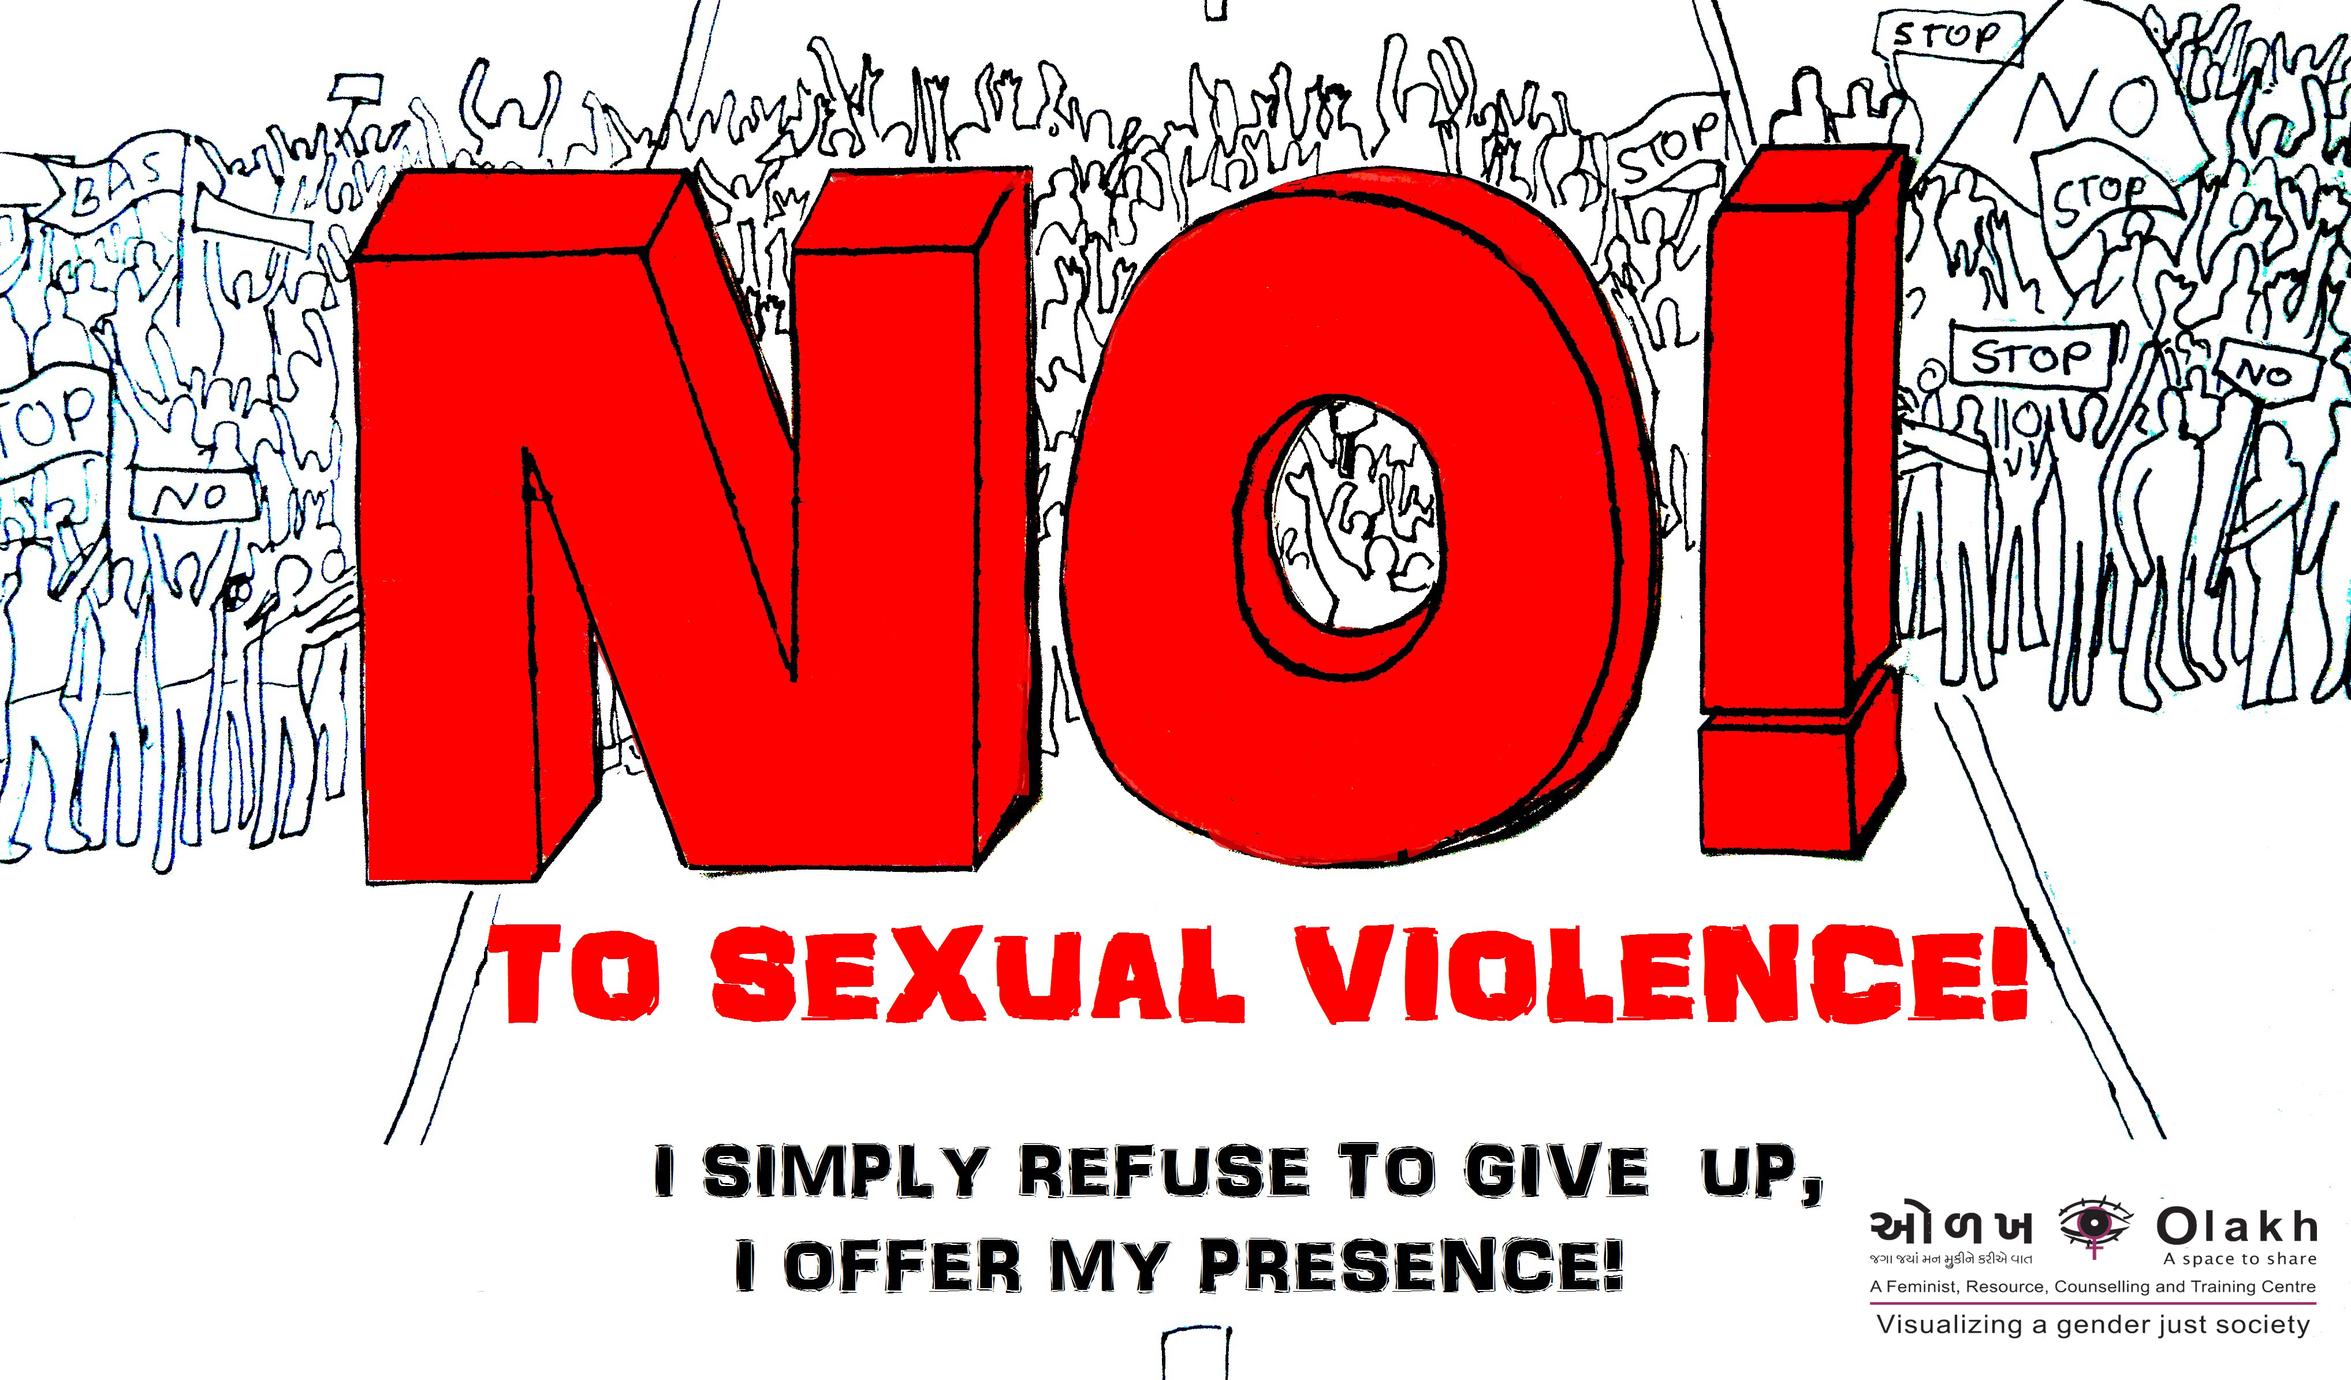 No! To sexual violence